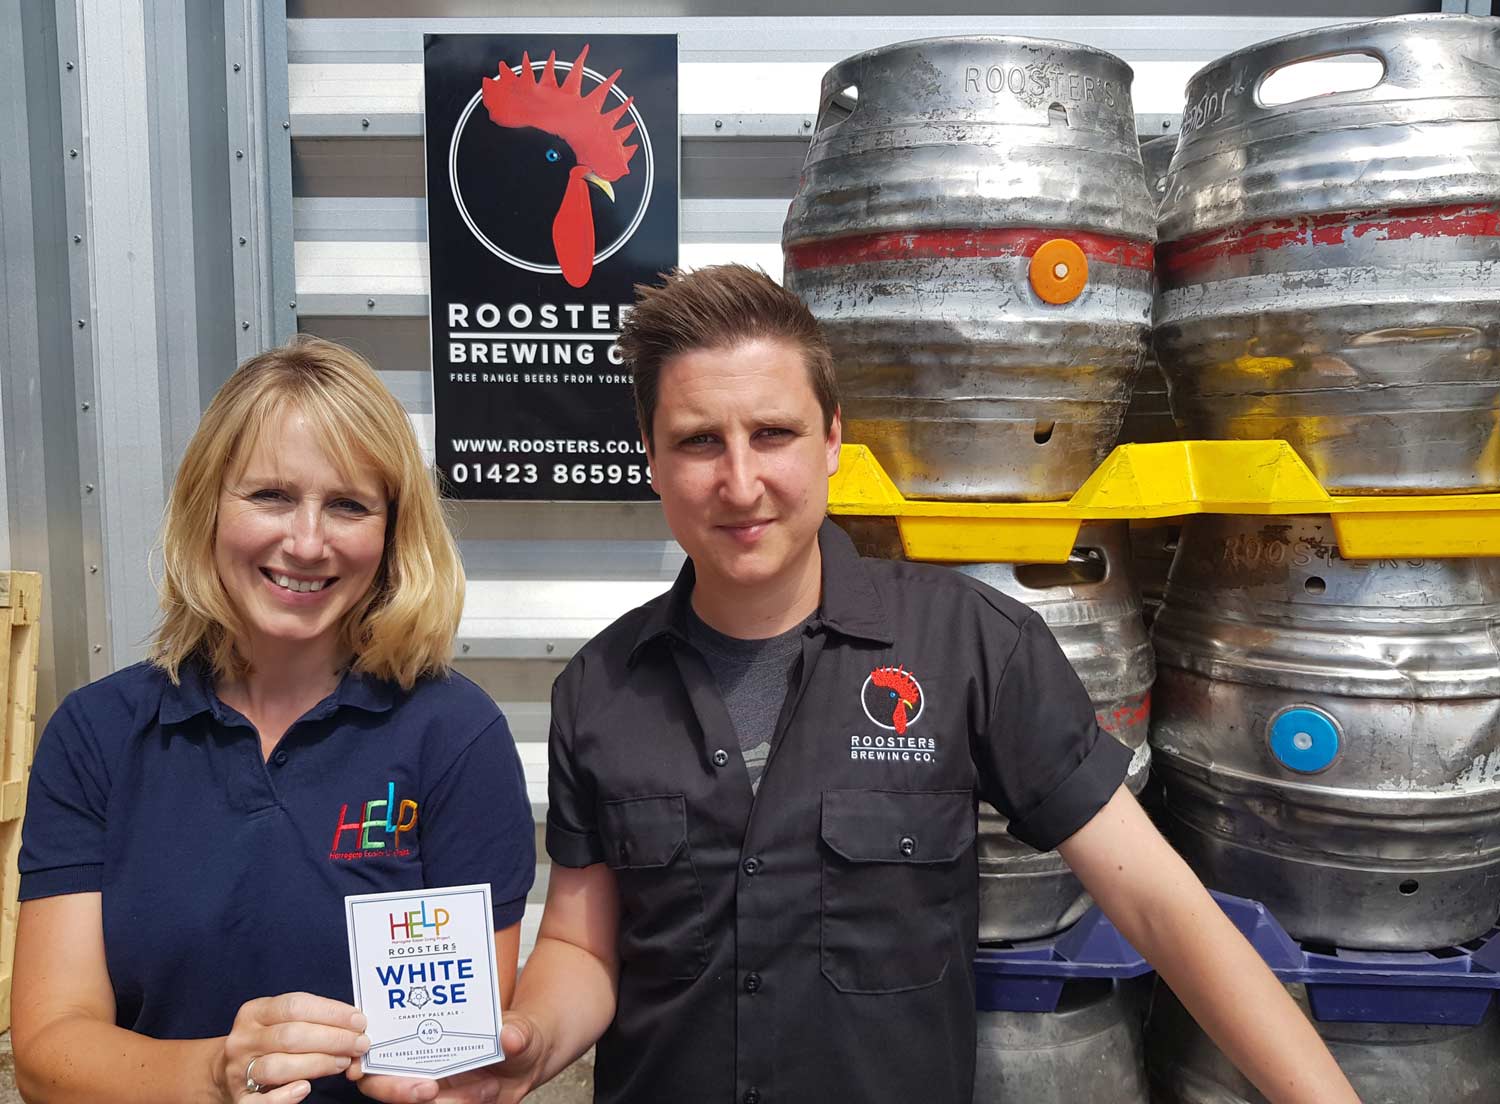 Anna Woollven, Project Development Worker at HELP with Tom Fozard, Commercial Manager at Roosters Brewing Co.